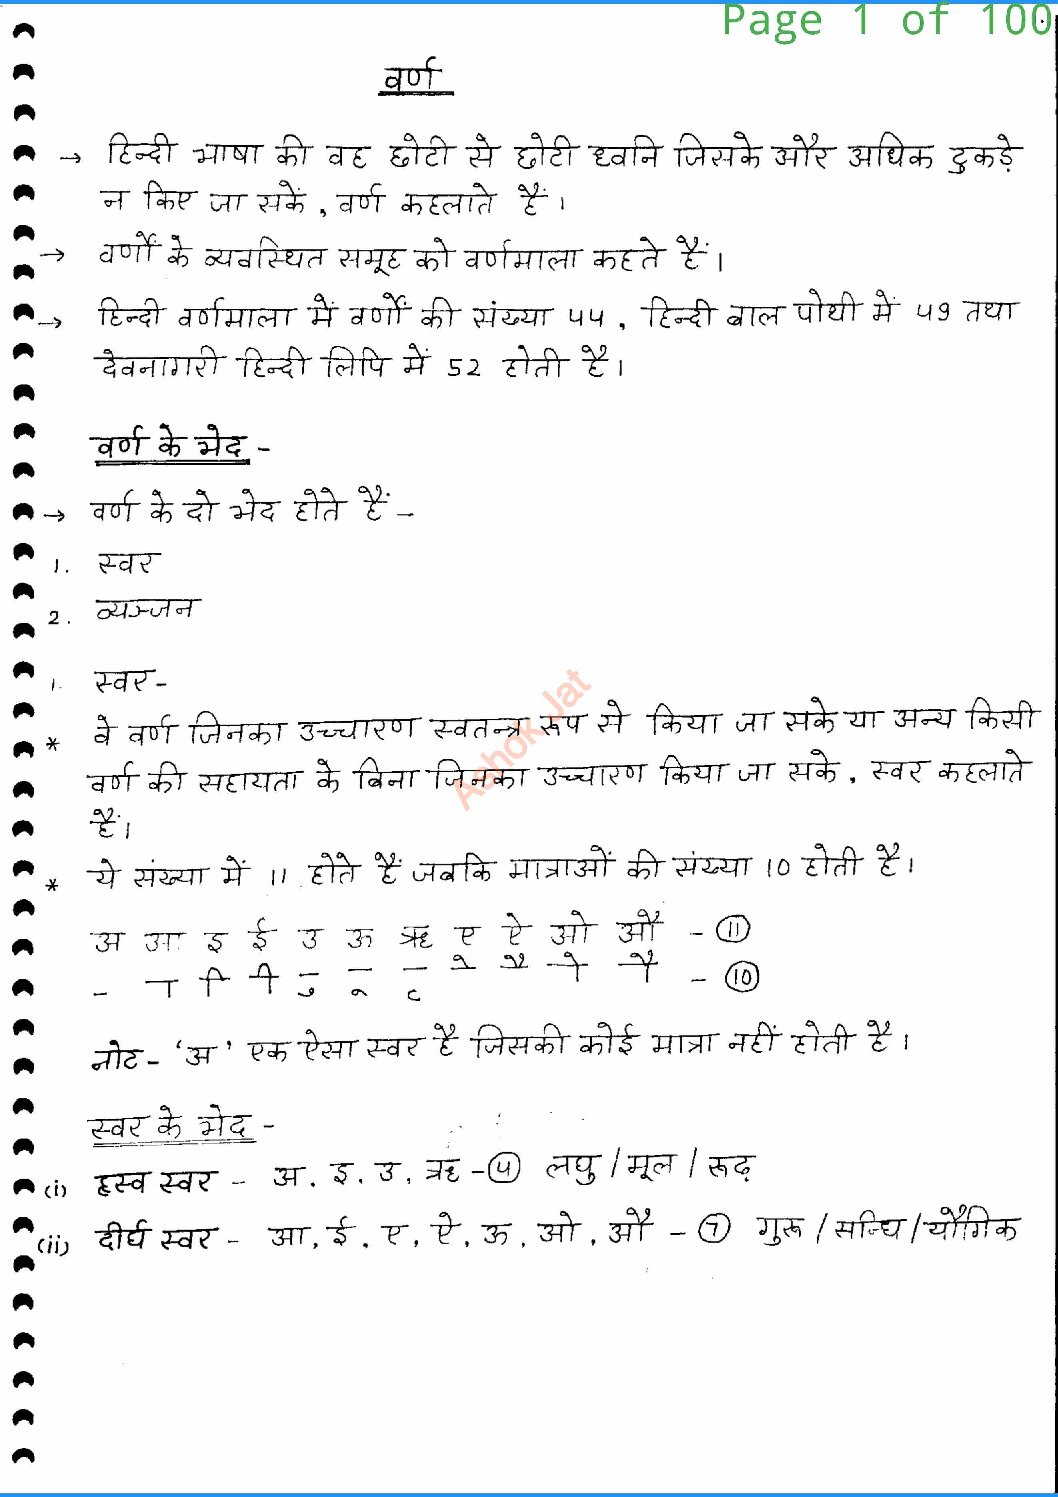 hindi-grammar-handwritten-notes-pdf-for-competitive-exams